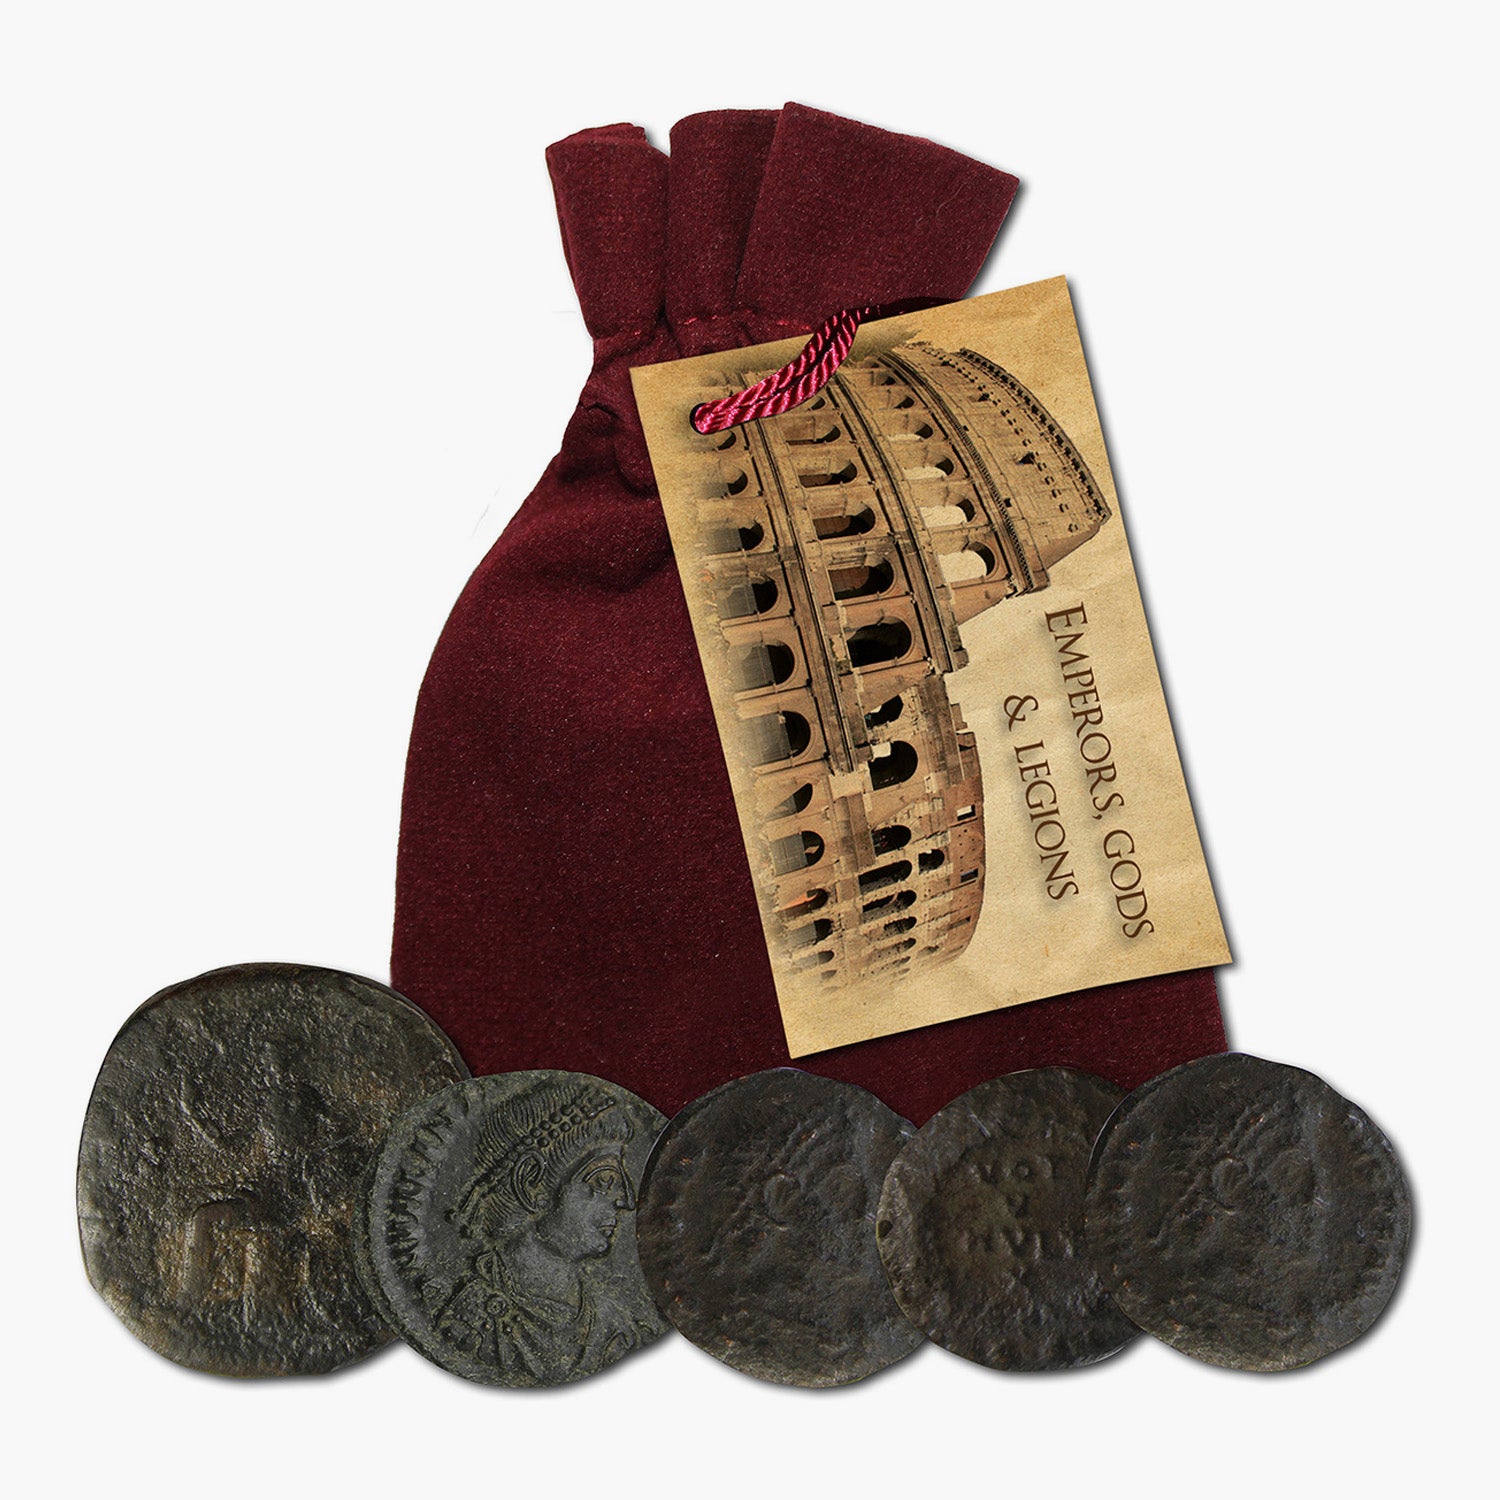 Emperors, Gods and Legions - Five Ancient Coins in Velvet Bag